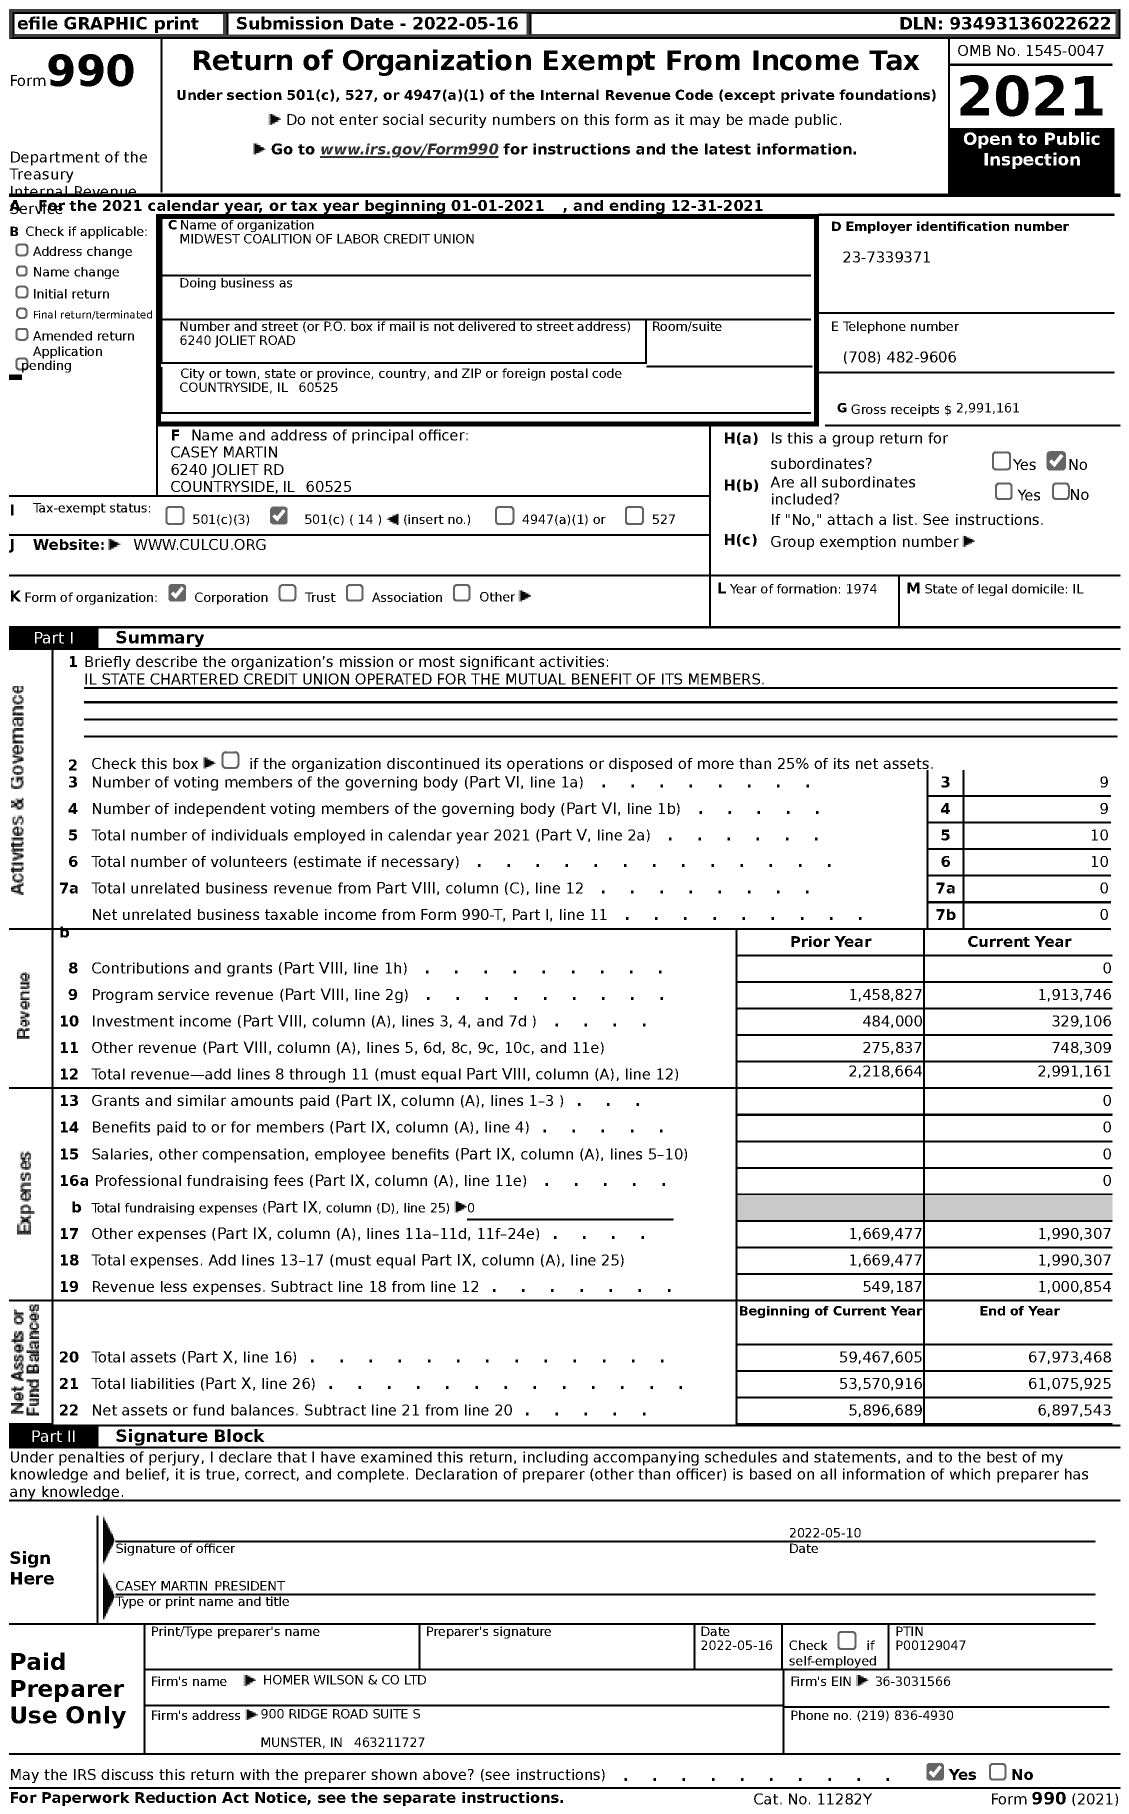 Image of first page of 2021 Form 990 for Midwest Coalition of Labor Credit Union